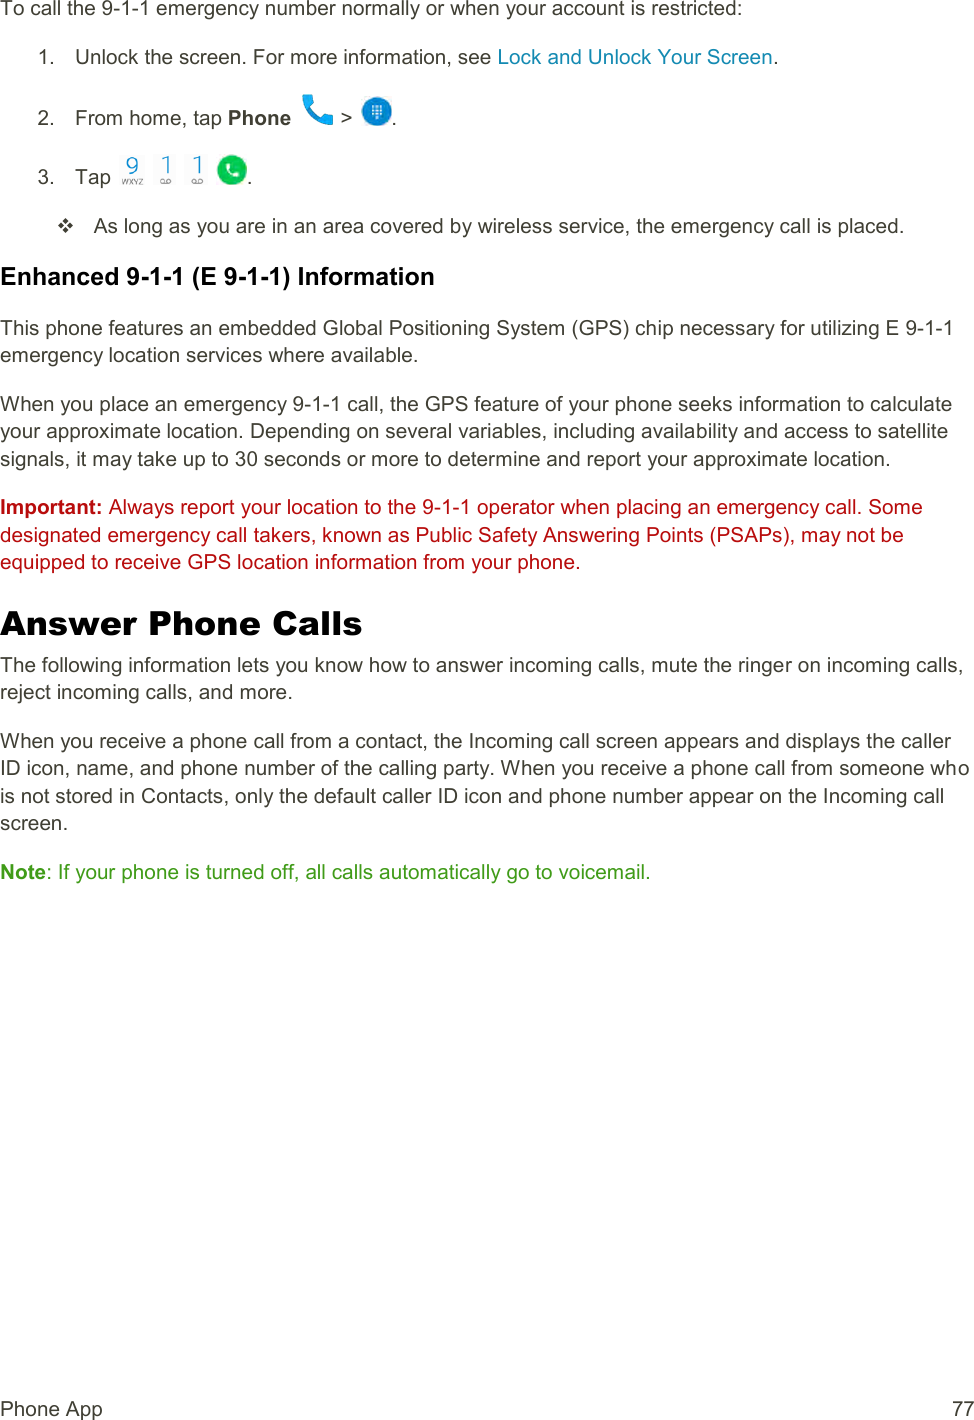 Phone App  77 To call the 9-1-1 emergency number normally or when your account is restricted: 1.  Unlock the screen. For more information, see Lock and Unlock Your Screen. 2.  From home, tap Phone   &gt;  . 3.  Tap        .   As long as you are in an area covered by wireless service, the emergency call is placed. Enhanced 9-1-1 (E 9-1-1) Information This phone features an embedded Global Positioning System (GPS) chip necessary for utilizing E 9-1-1 emergency location services where available. When you place an emergency 9-1-1 call, the GPS feature of your phone seeks information to calculate your approximate location. Depending on several variables, including availability and access to satellite signals, it may take up to 30 seconds or more to determine and report your approximate location. Important: Always report your location to the 9-1-1 operator when placing an emergency call. Some designated emergency call takers, known as Public Safety Answering Points (PSAPs), may not be equipped to receive GPS location information from your phone. Answer Phone Calls The following information lets you know how to answer incoming calls, mute the ringer on incoming calls, reject incoming calls, and more. When you receive a phone call from a contact, the Incoming call screen appears and displays the caller ID icon, name, and phone number of the calling party. When you receive a phone call from someone who is not stored in Contacts, only the default caller ID icon and phone number appear on the Incoming call screen. Note: If your phone is turned off, all calls automatically go to voicemail. 